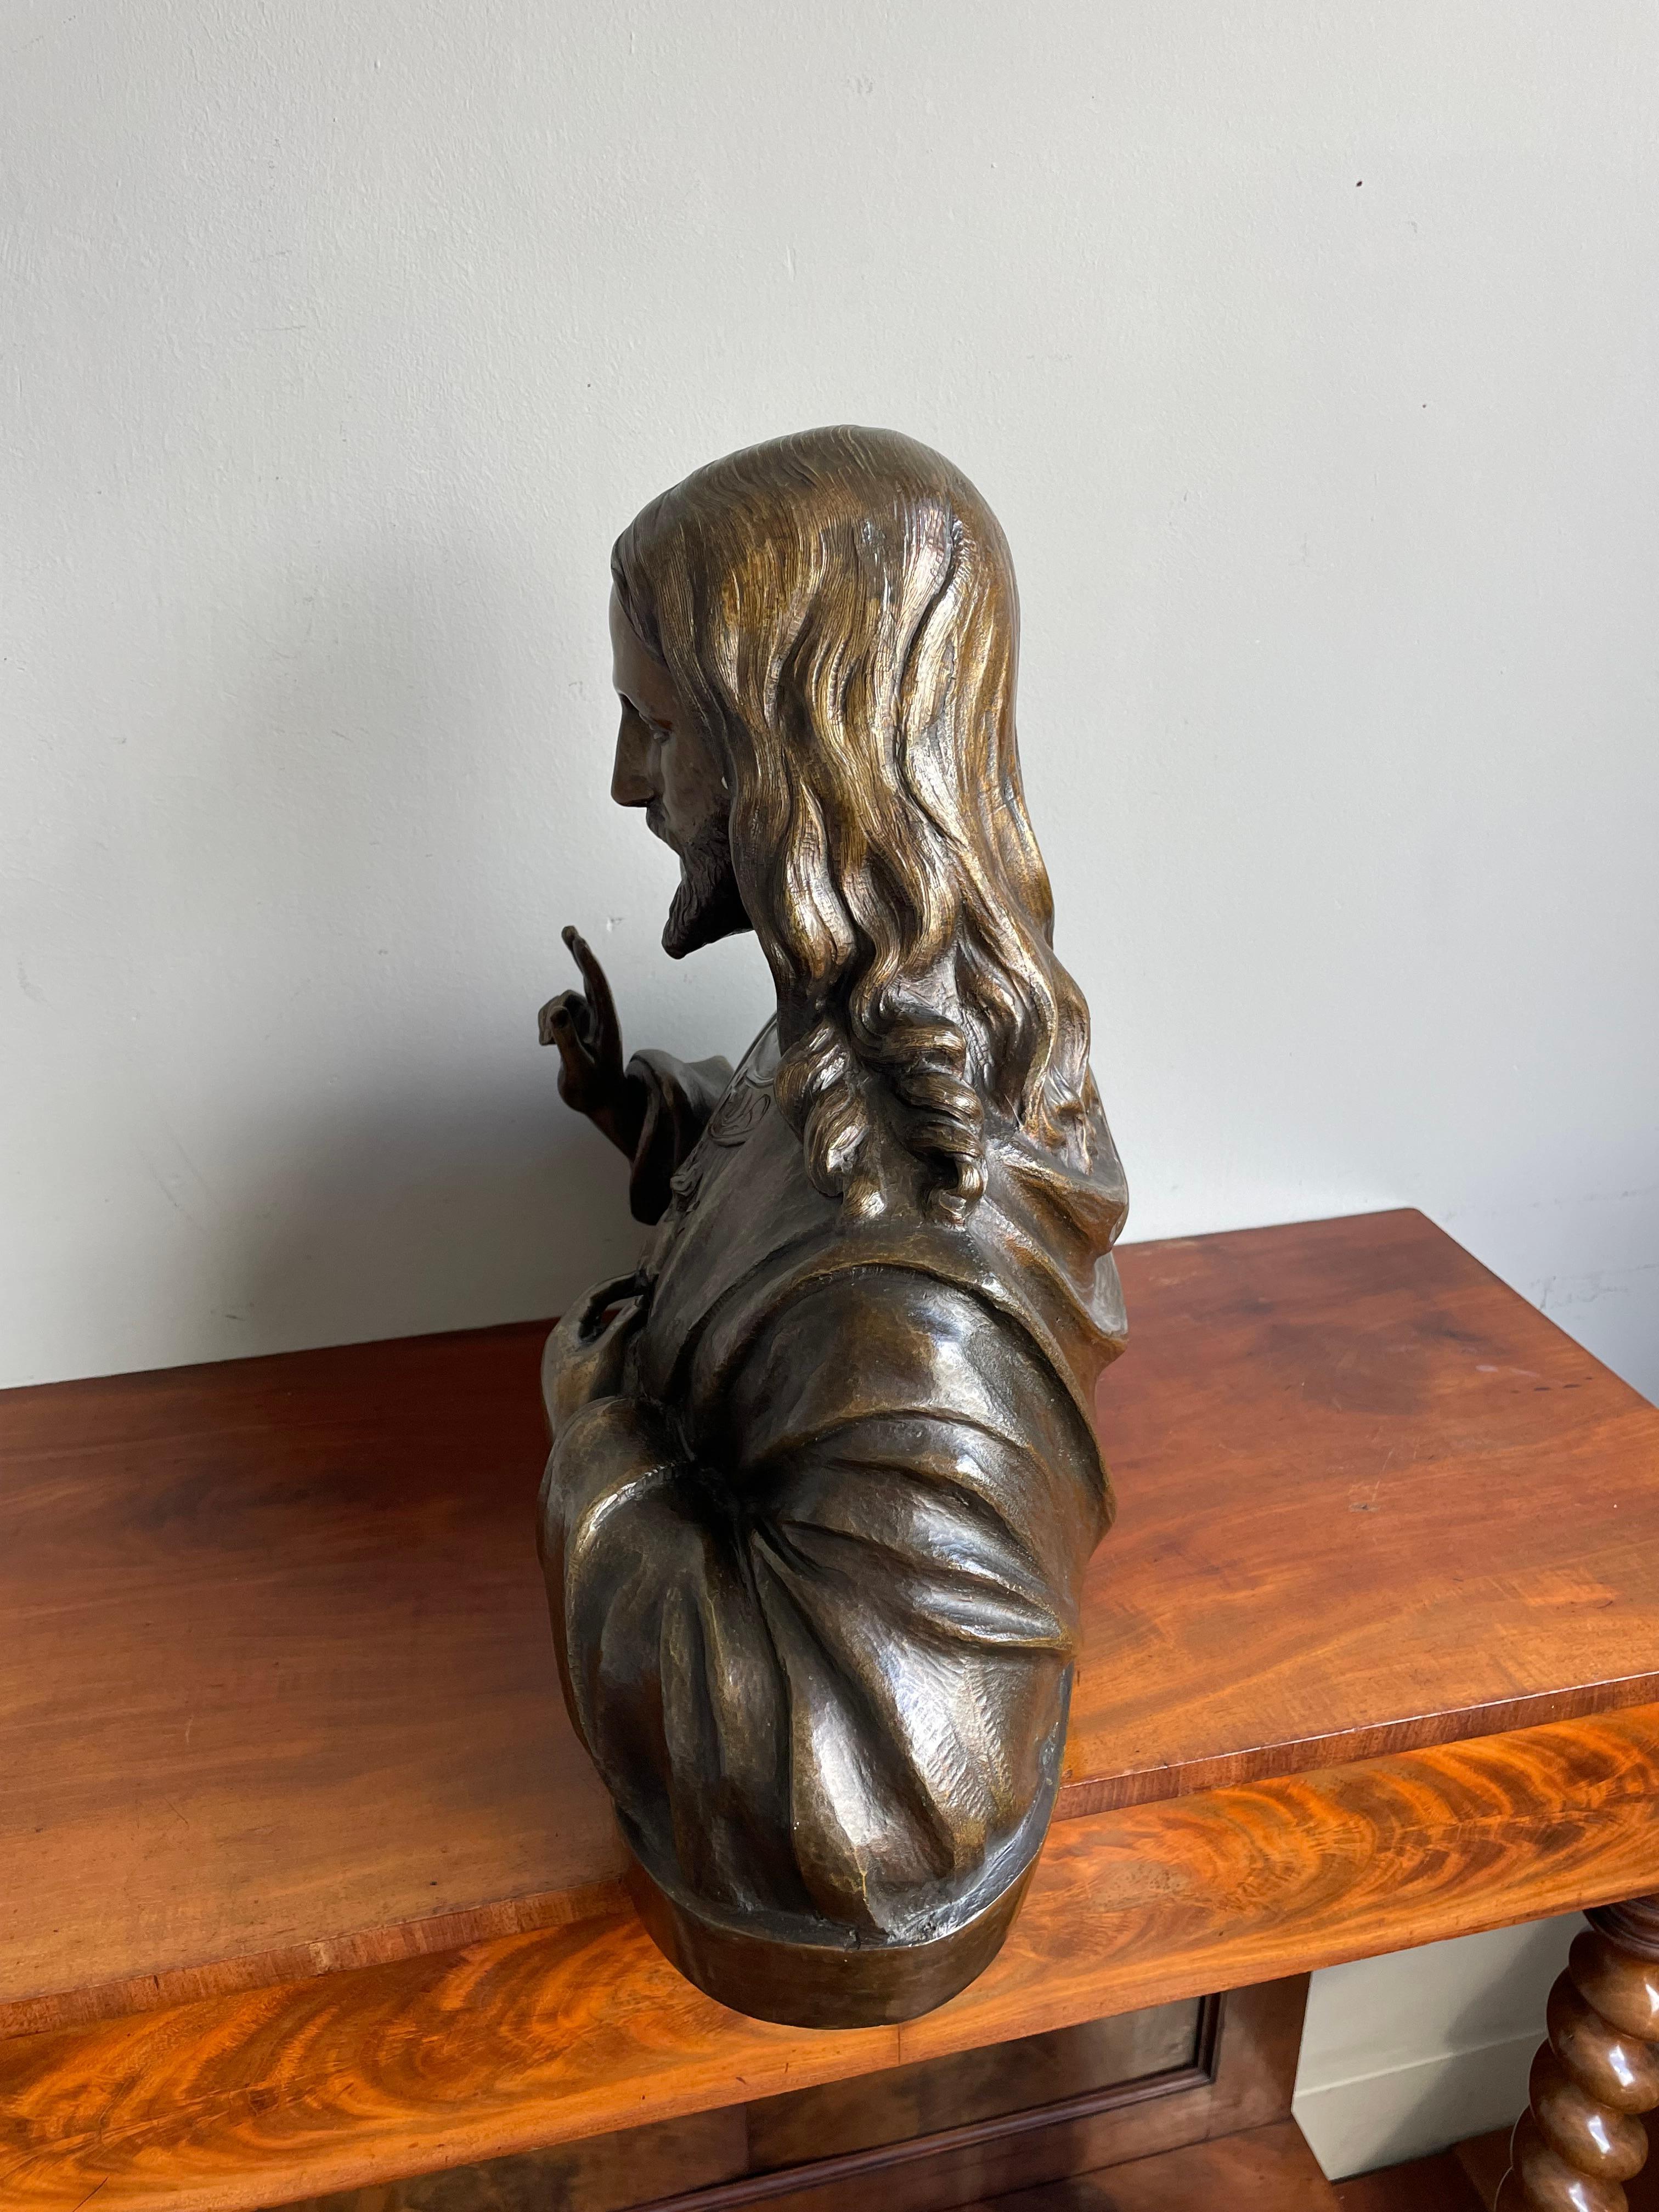 Rare Antique Bronze Holy Heart Sculpture / Bust of Our Lord Jesus Christ 1920 For Sale 5